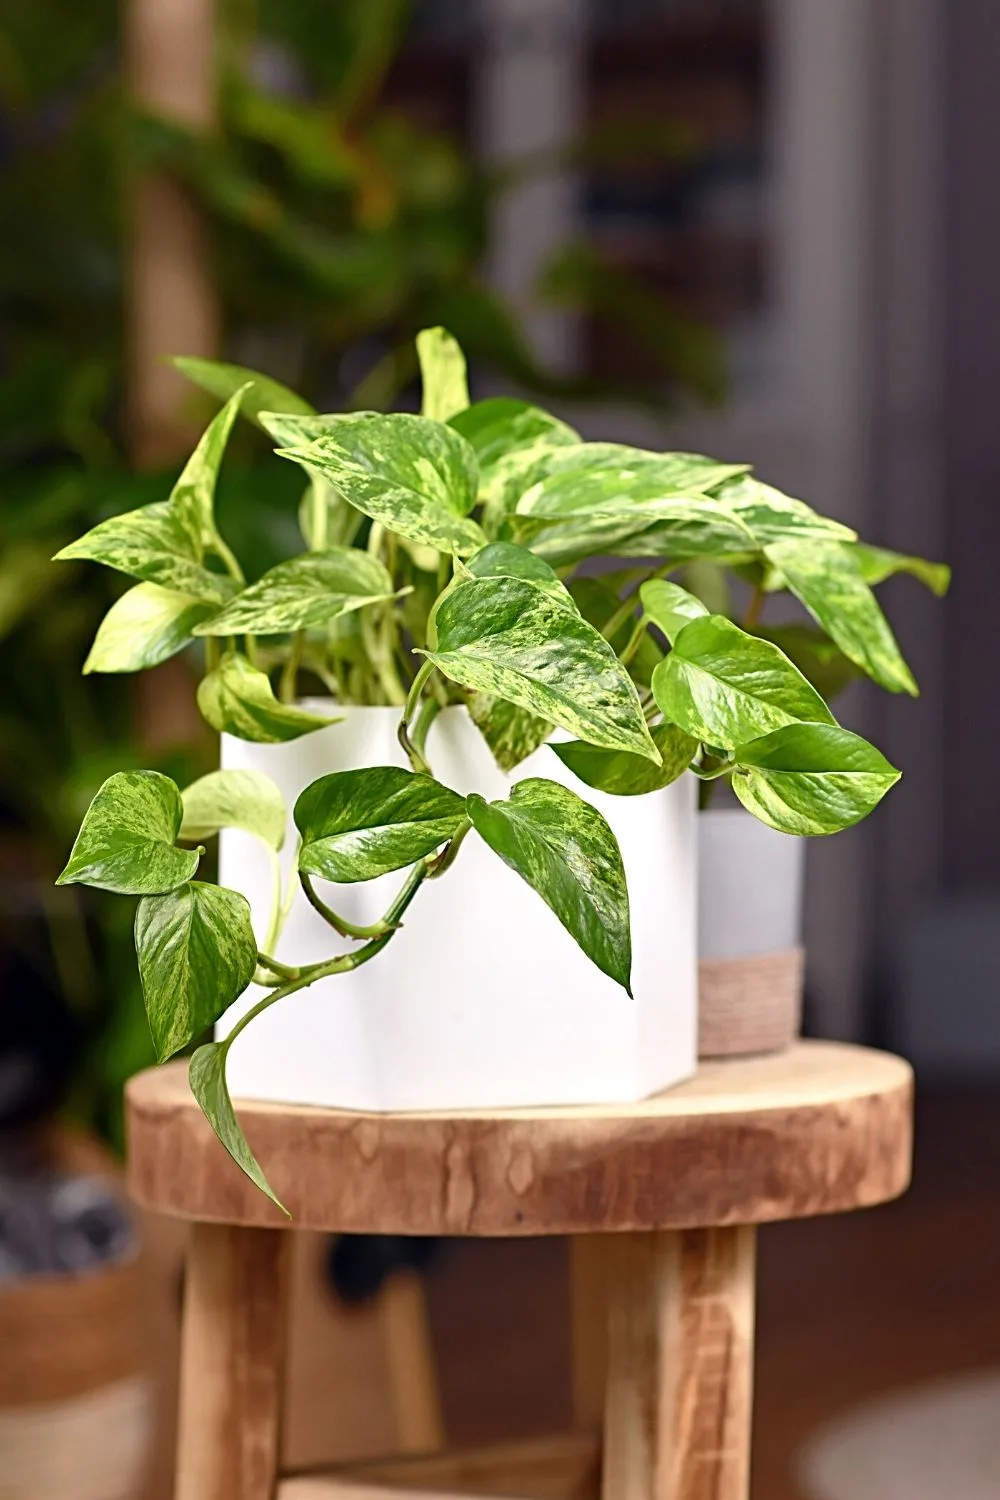 Pothos jade is a trailing plant that can beautify northeast-facing windows